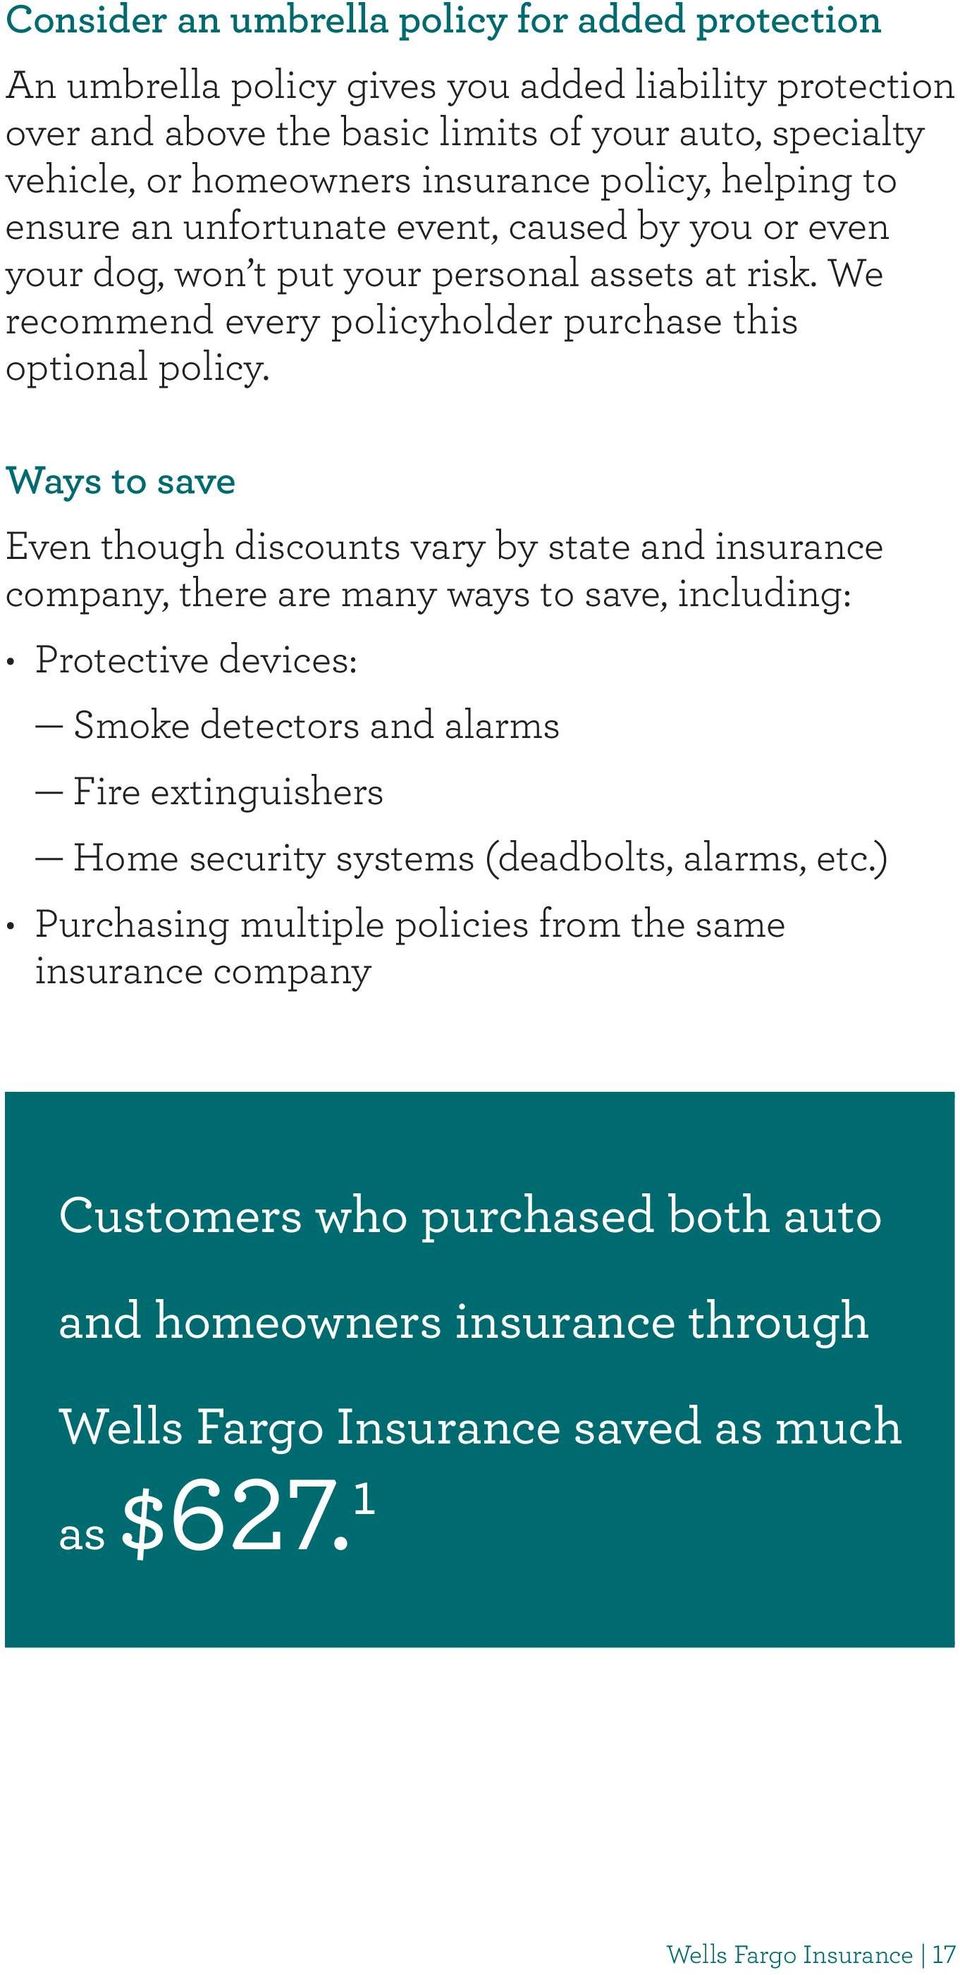 Ways to save Even though discounts vary by state and insurance company, there are many ways to save, including: Protective devices: Smoke detectors and alarms Fire extinguishers Home security systems